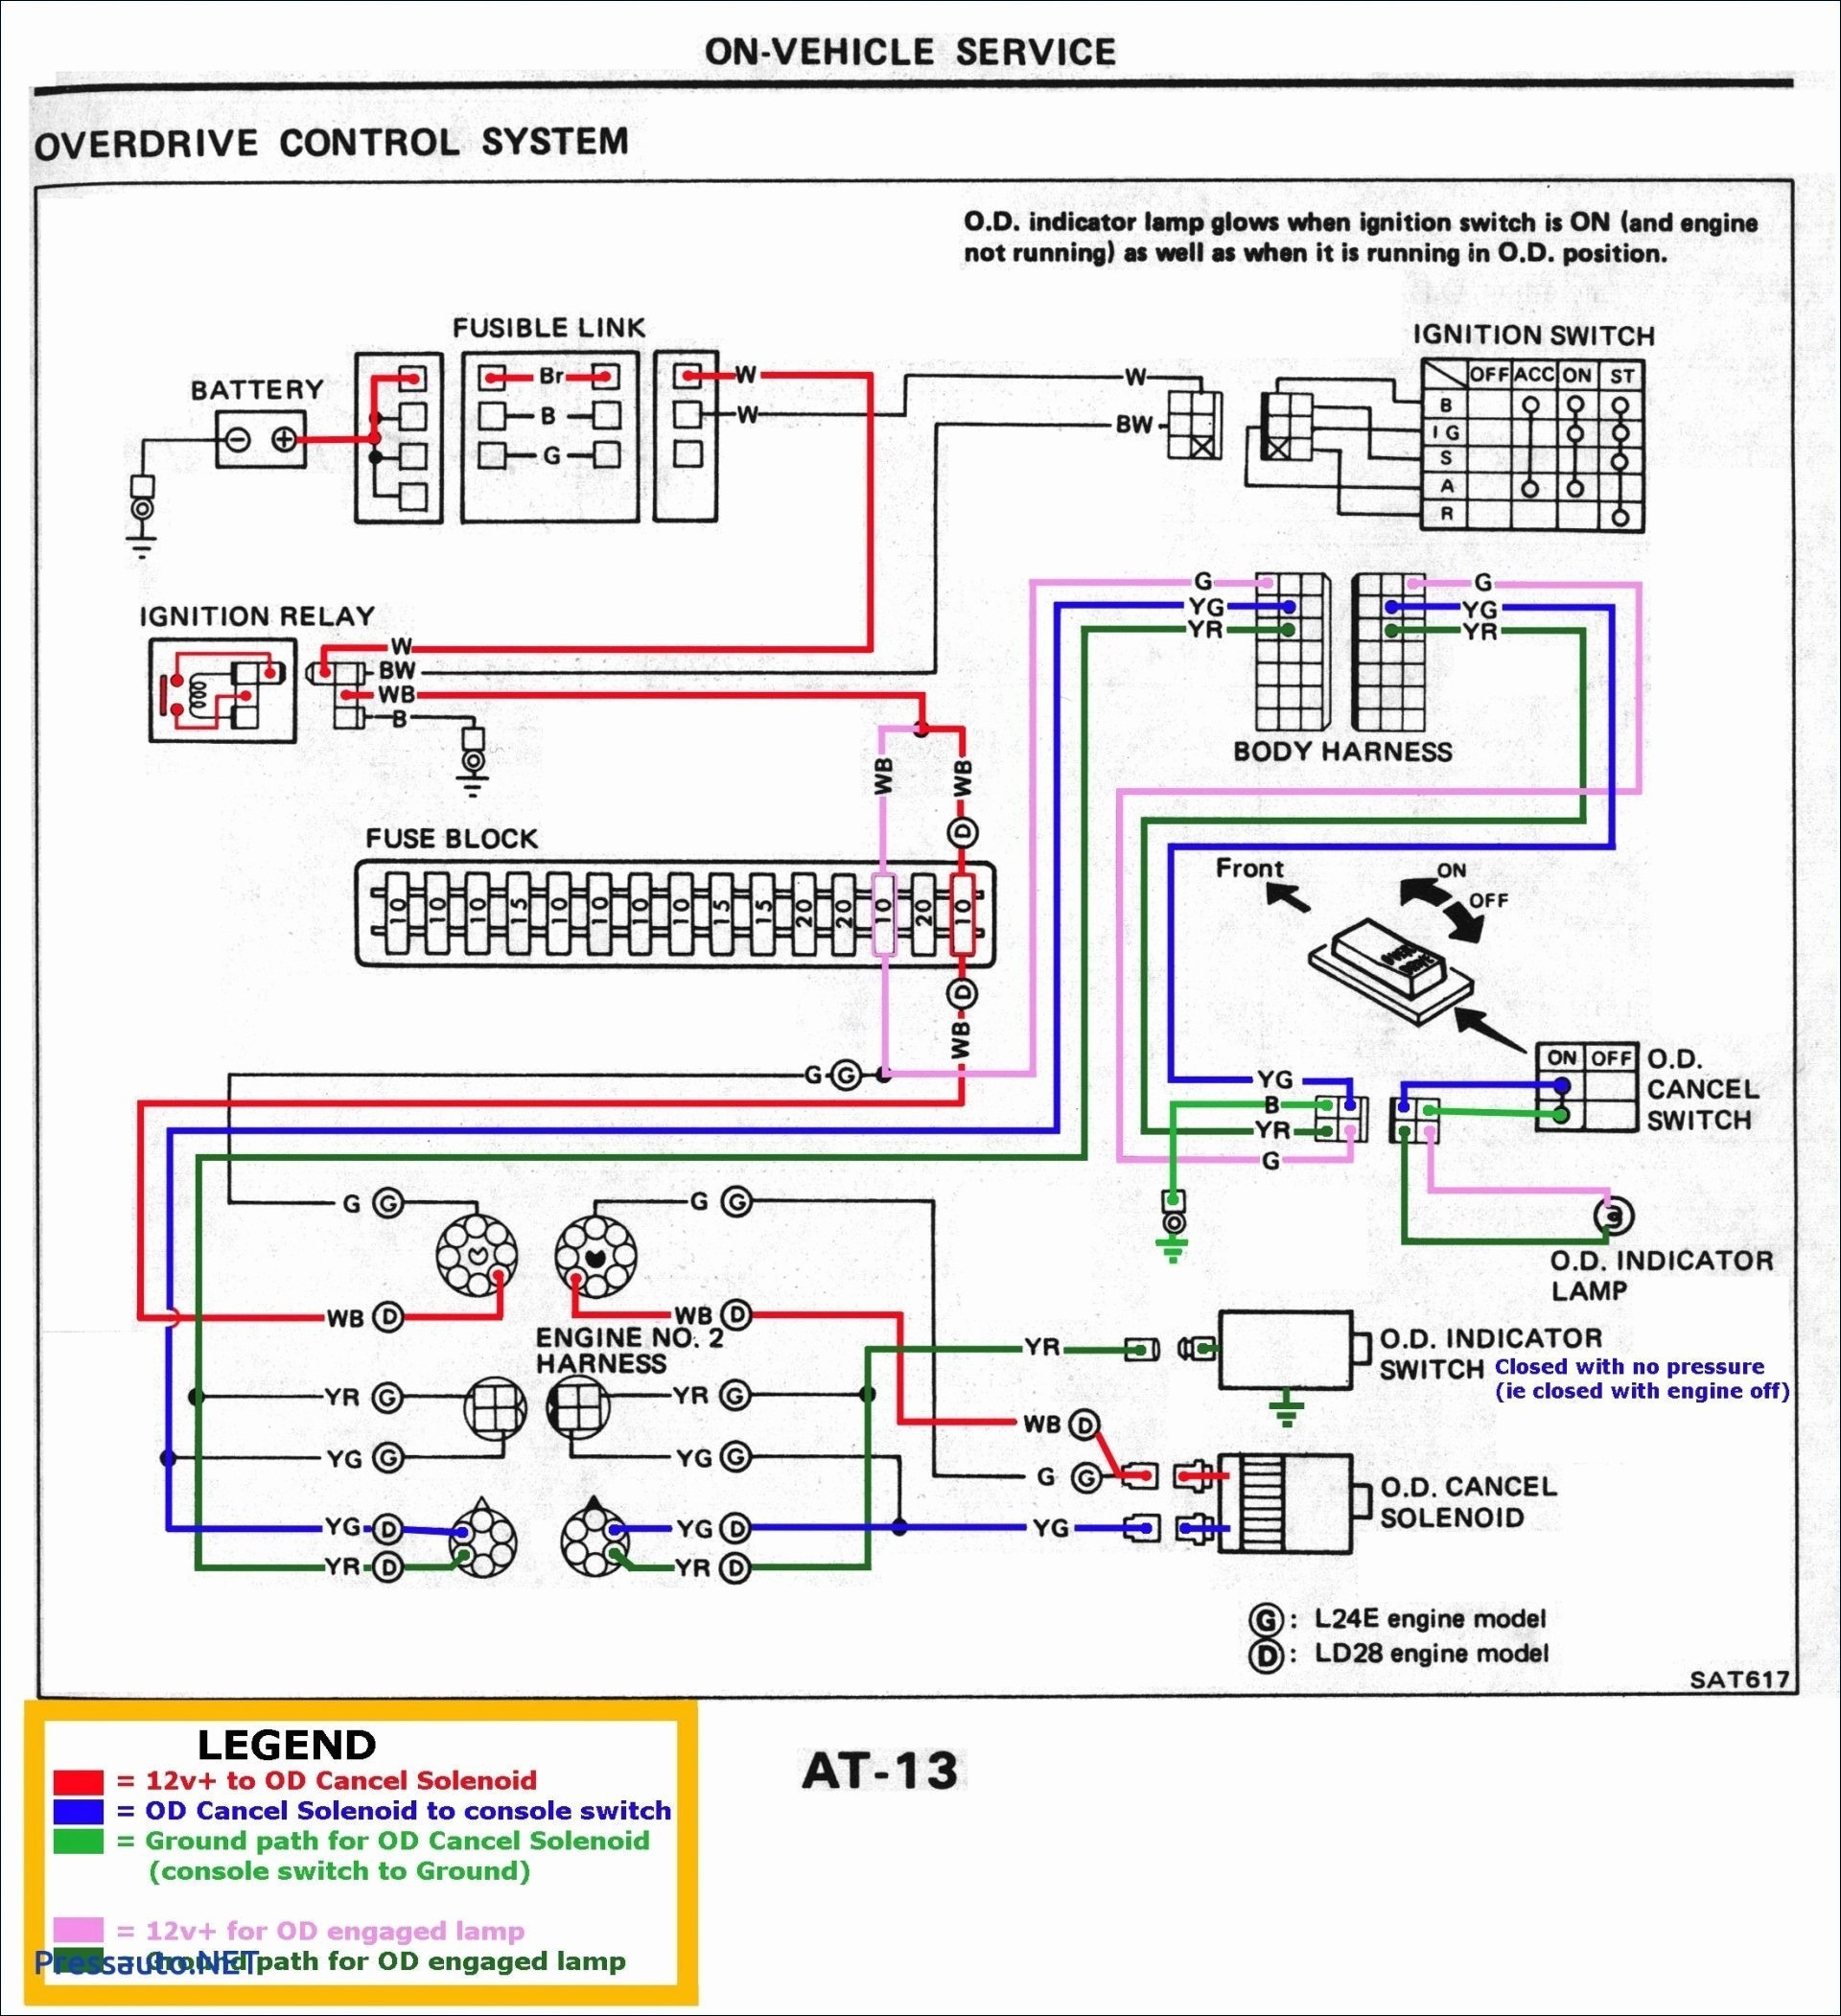 Wiring Diagram For Thermostat To Furnace New Best Suburban Gas Furnace Wiring Diagram